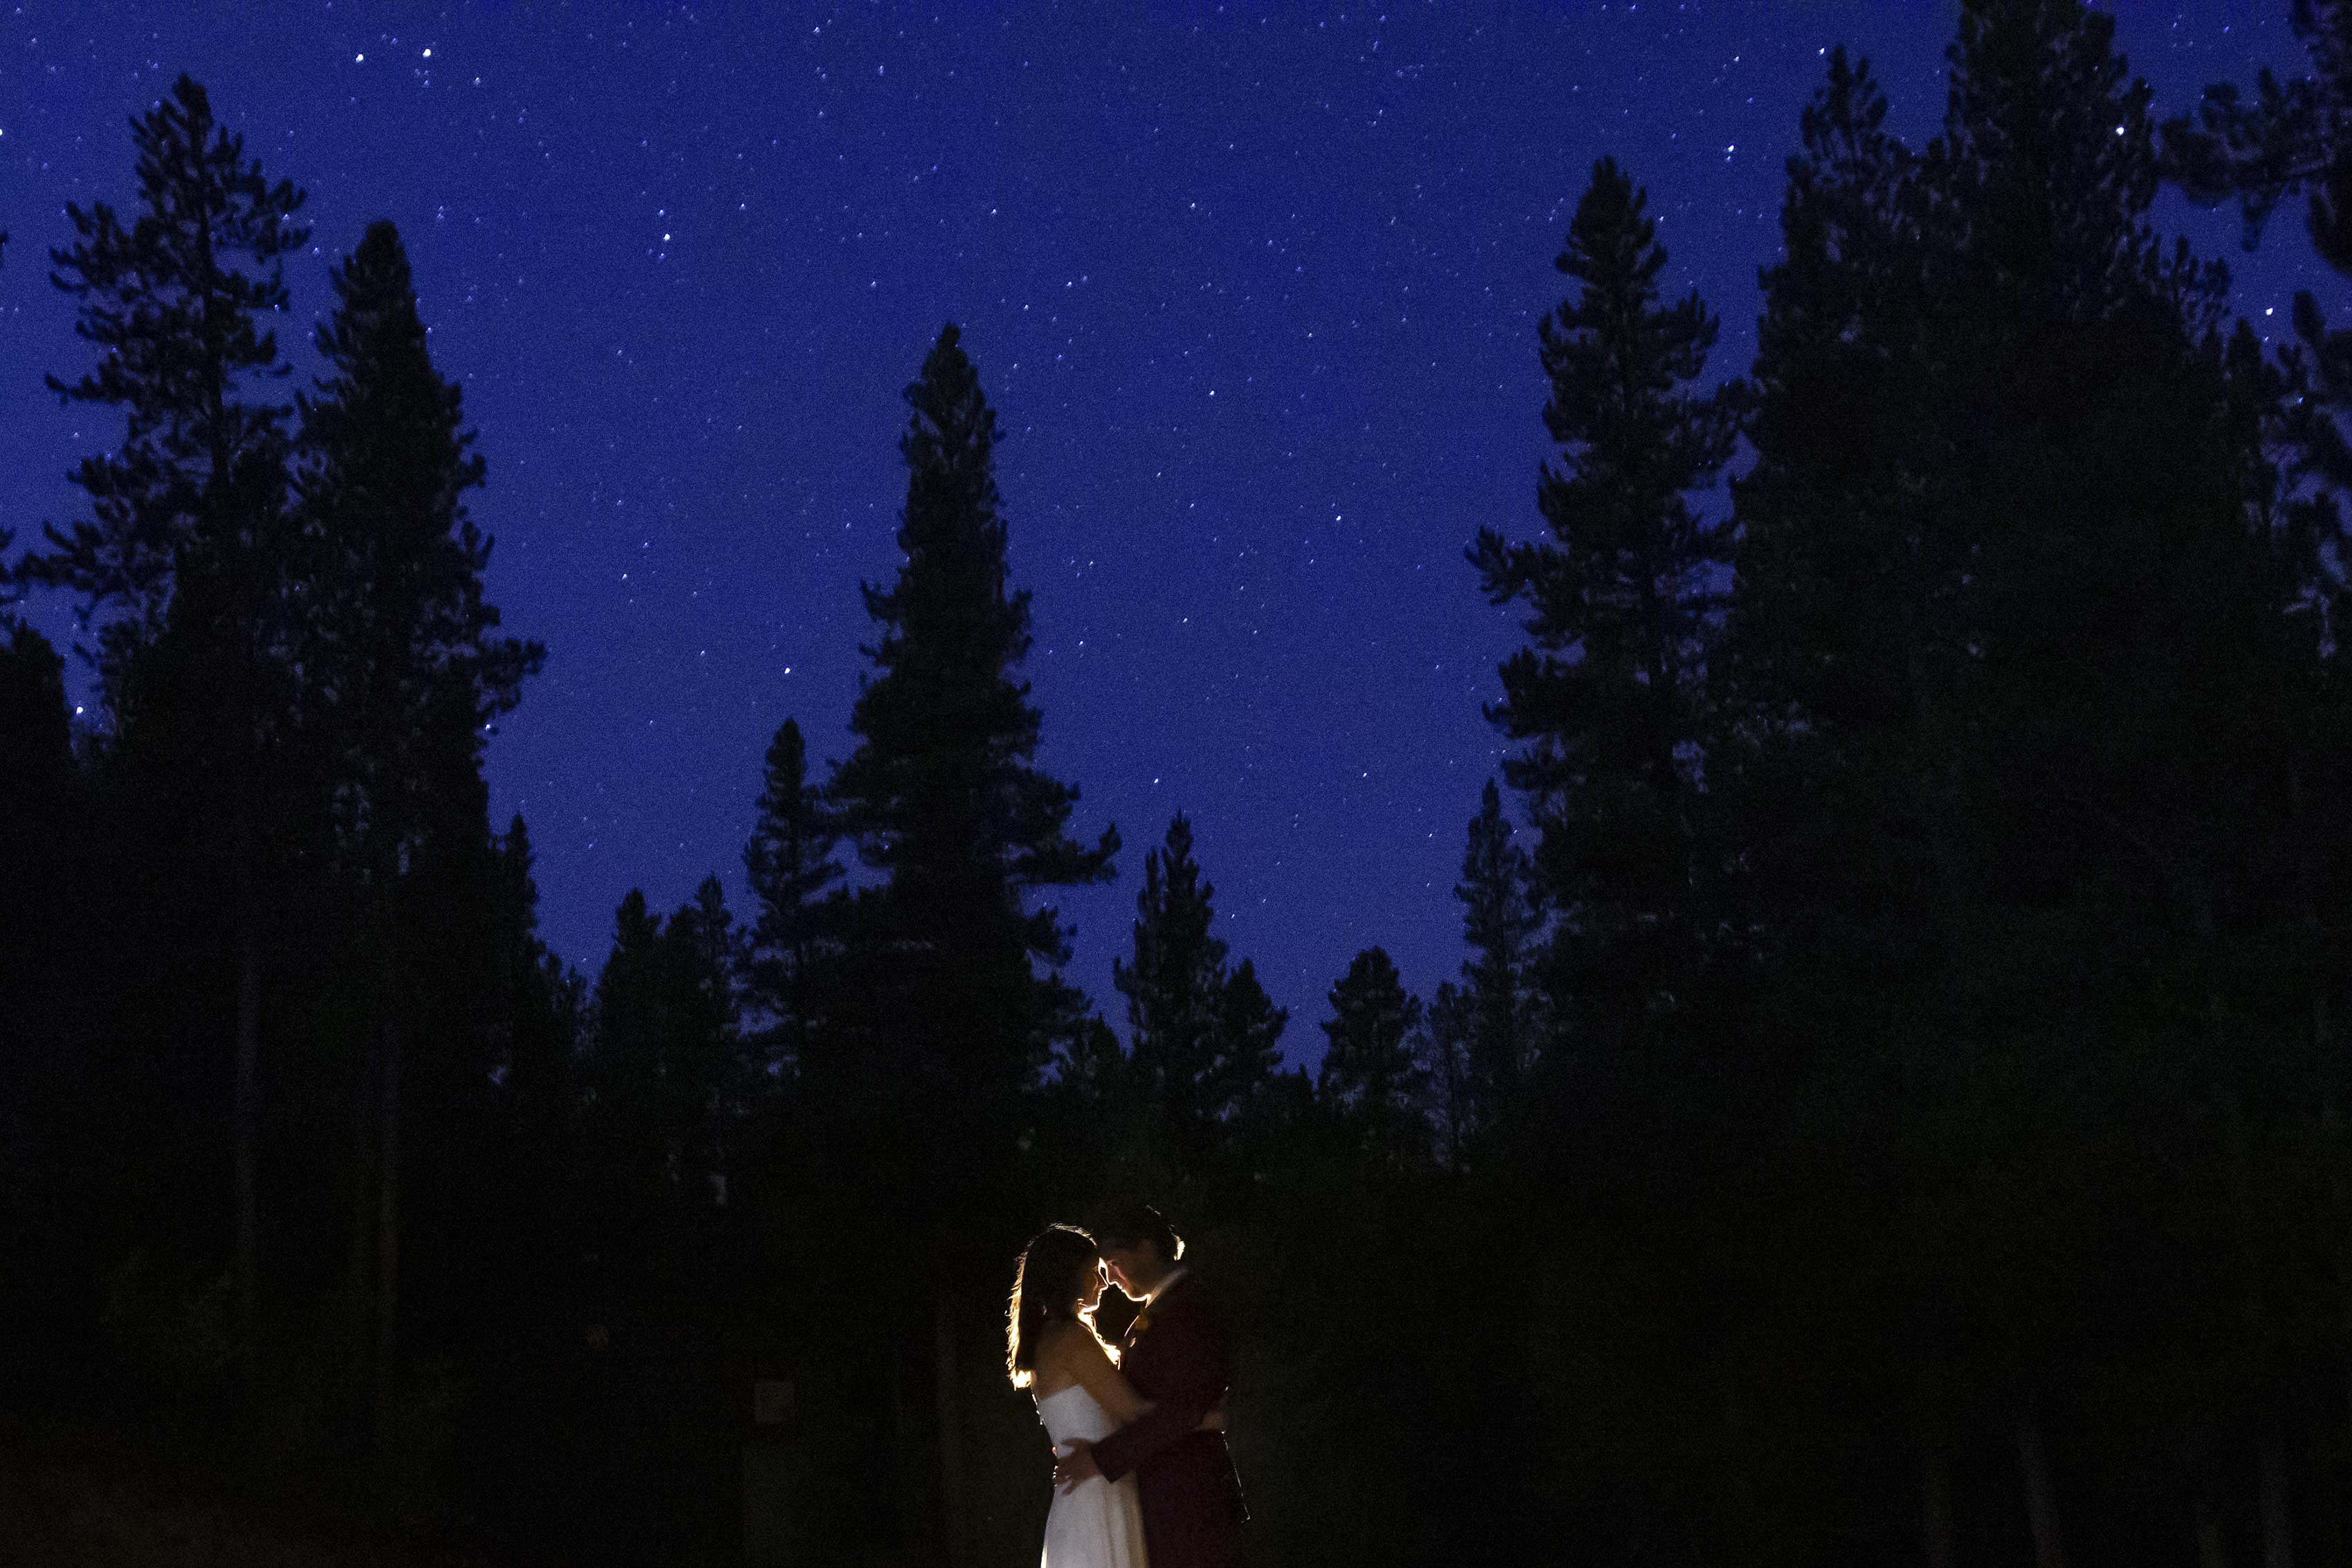 Chris and Marla share a moment under the stars during their elopement in Black Hawk, Colorado